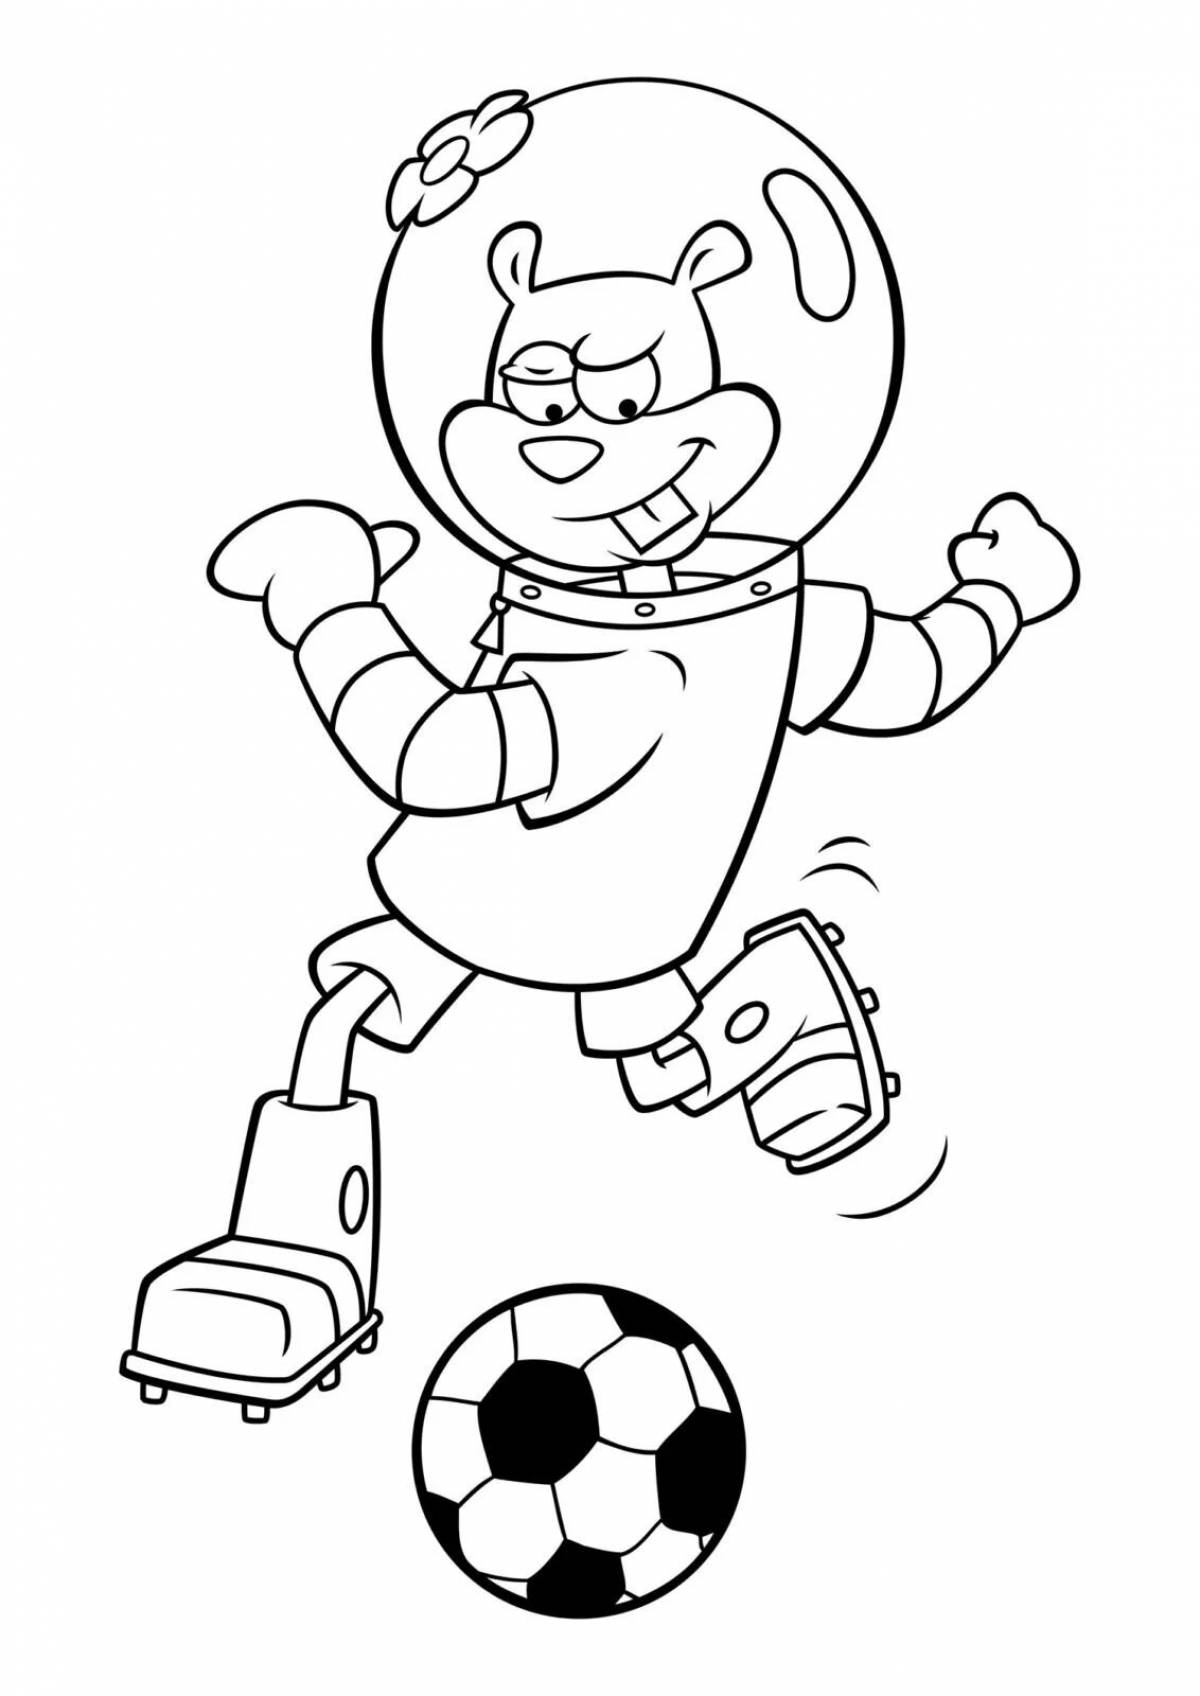 Sandy chicks animated coloring pages